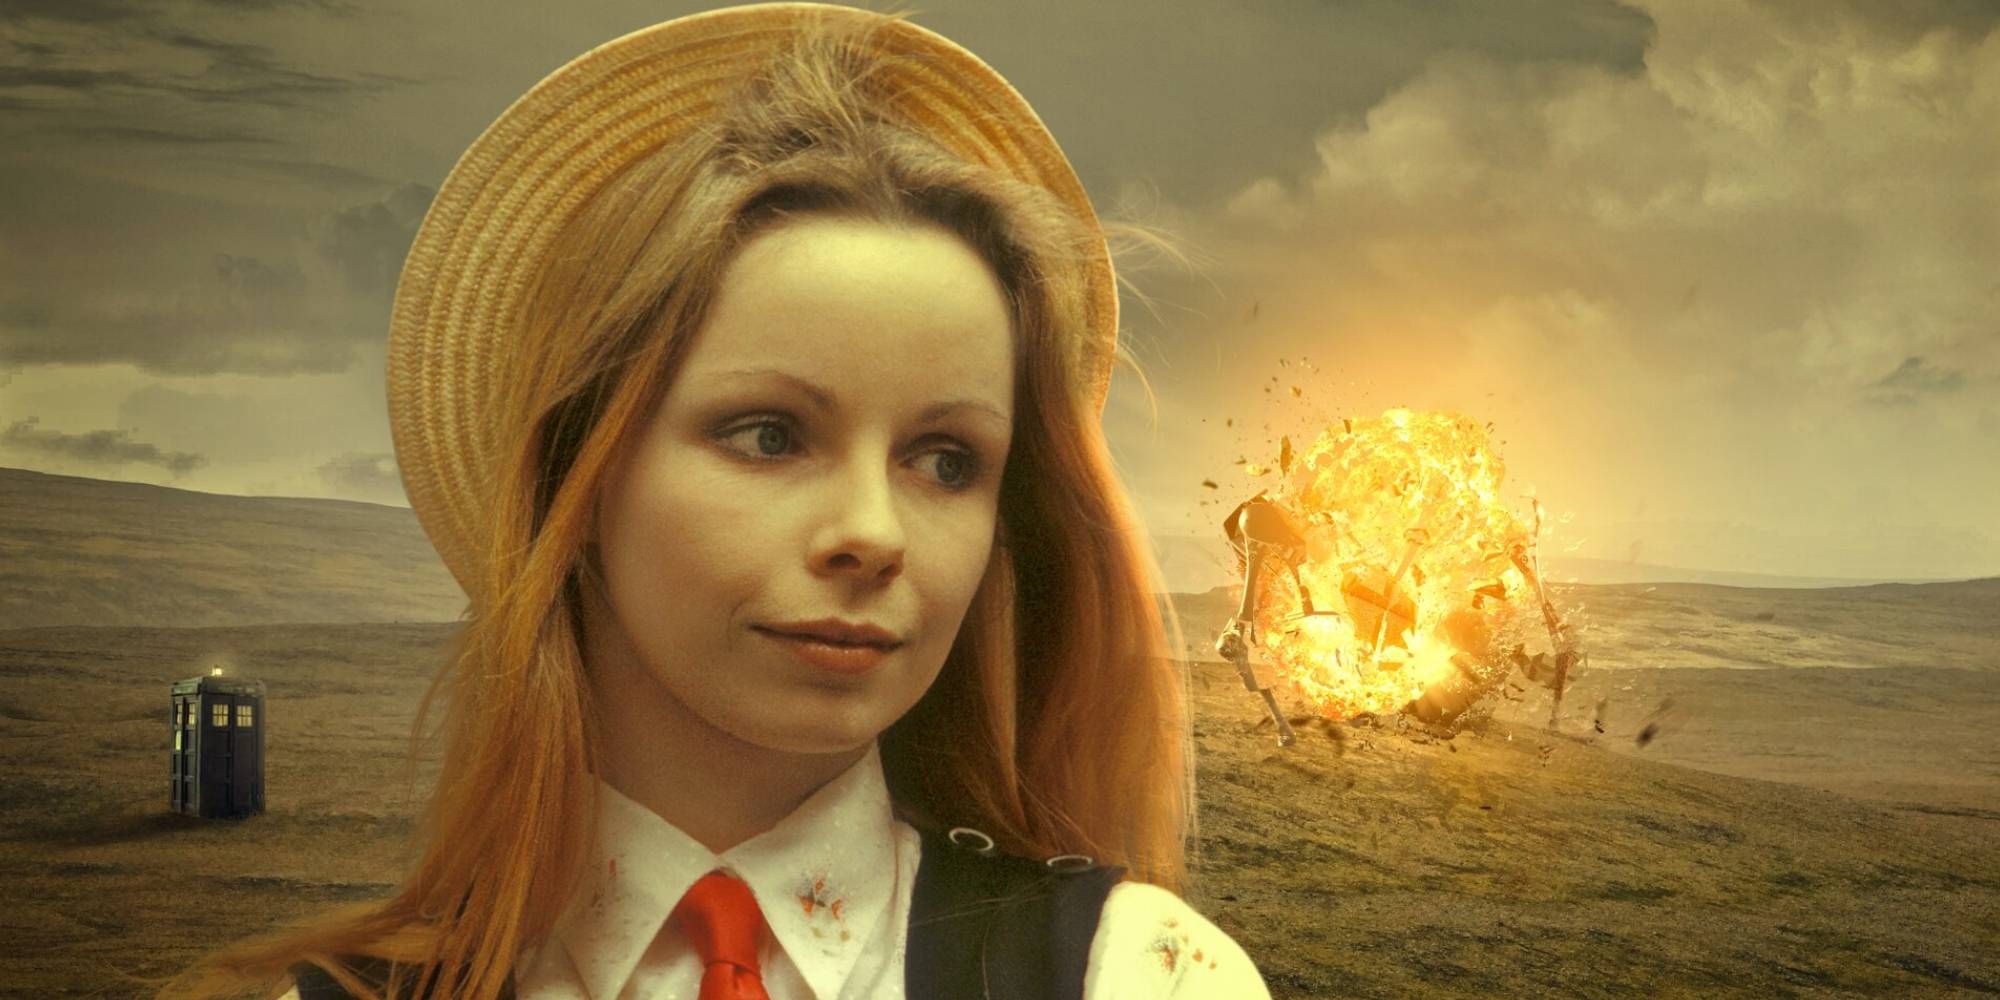 Romana staring into the distance as the TARDIS and a fire is in the background